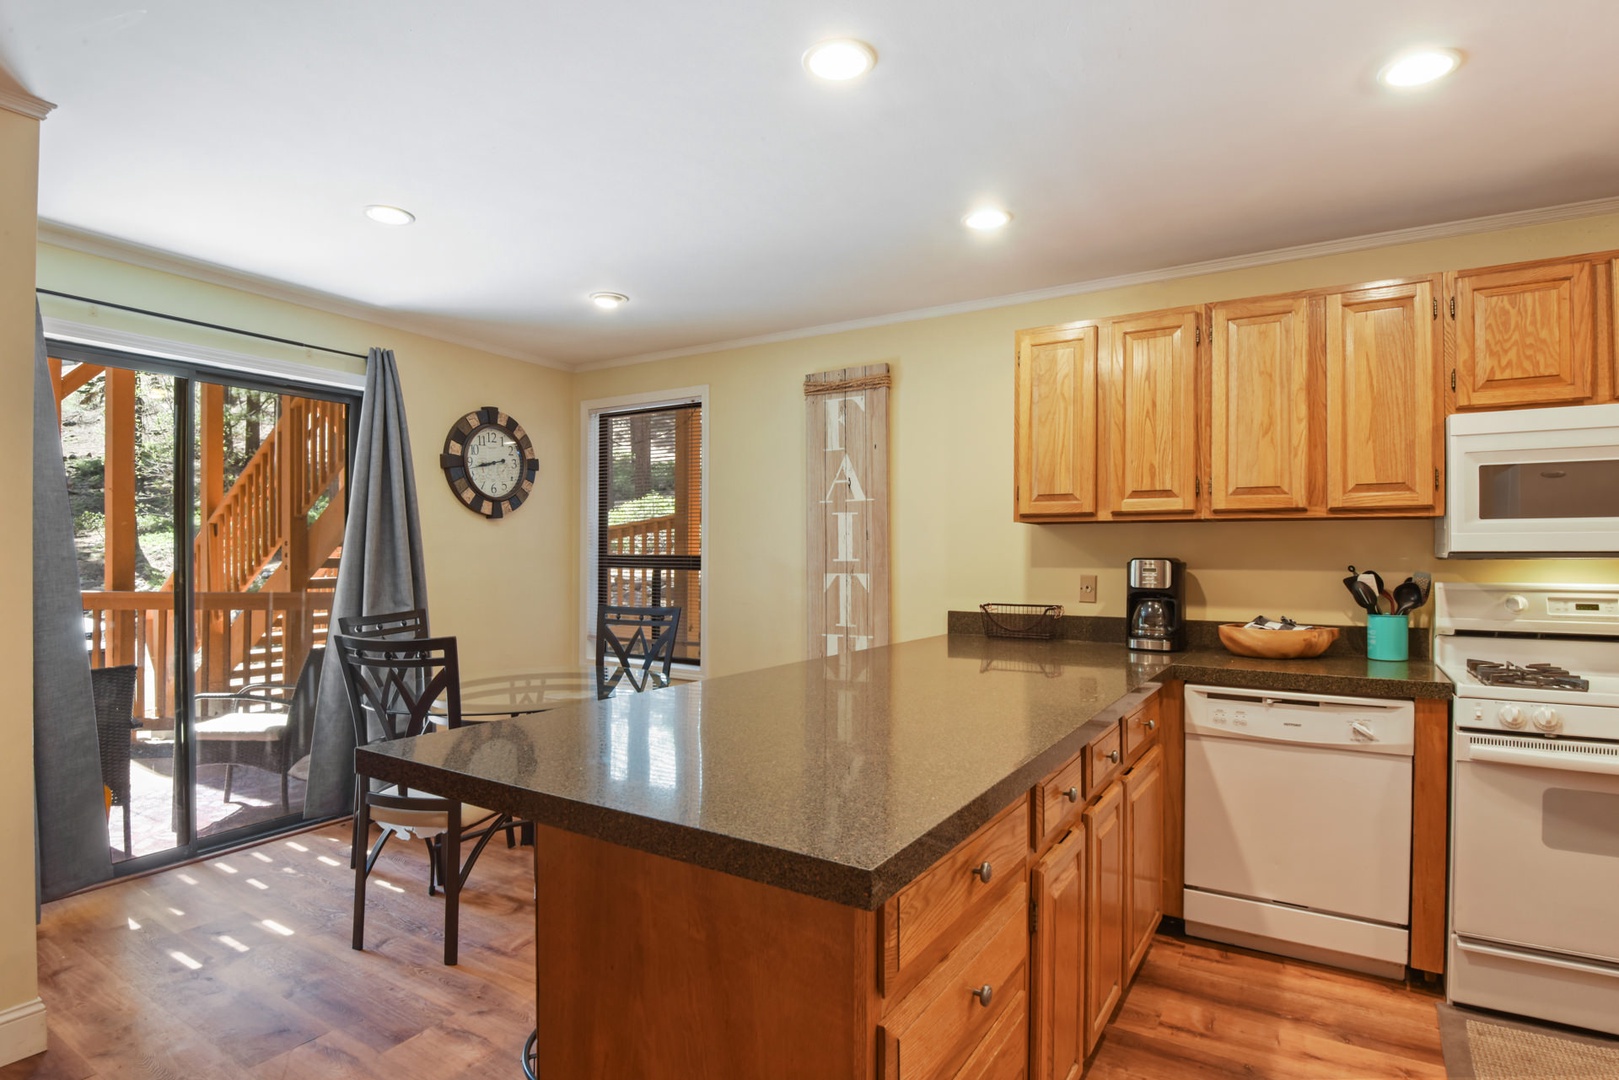 Open kitchen allows you to socialize and cook as a family